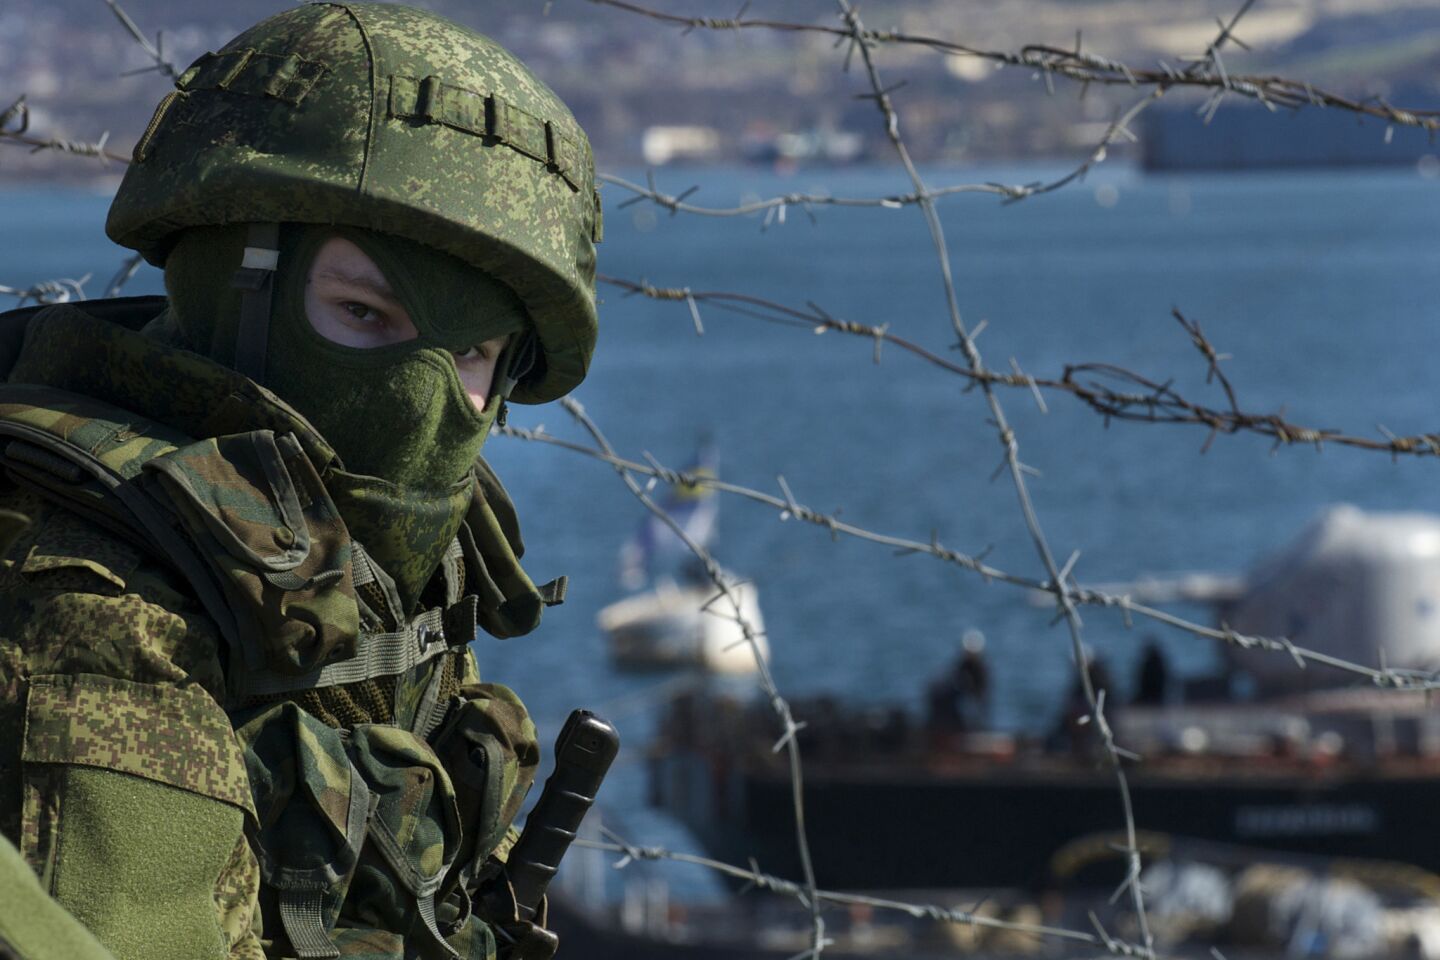 Russian soldiers guard a pier where two Ukrainian naval ships are moored near Sevastopol.